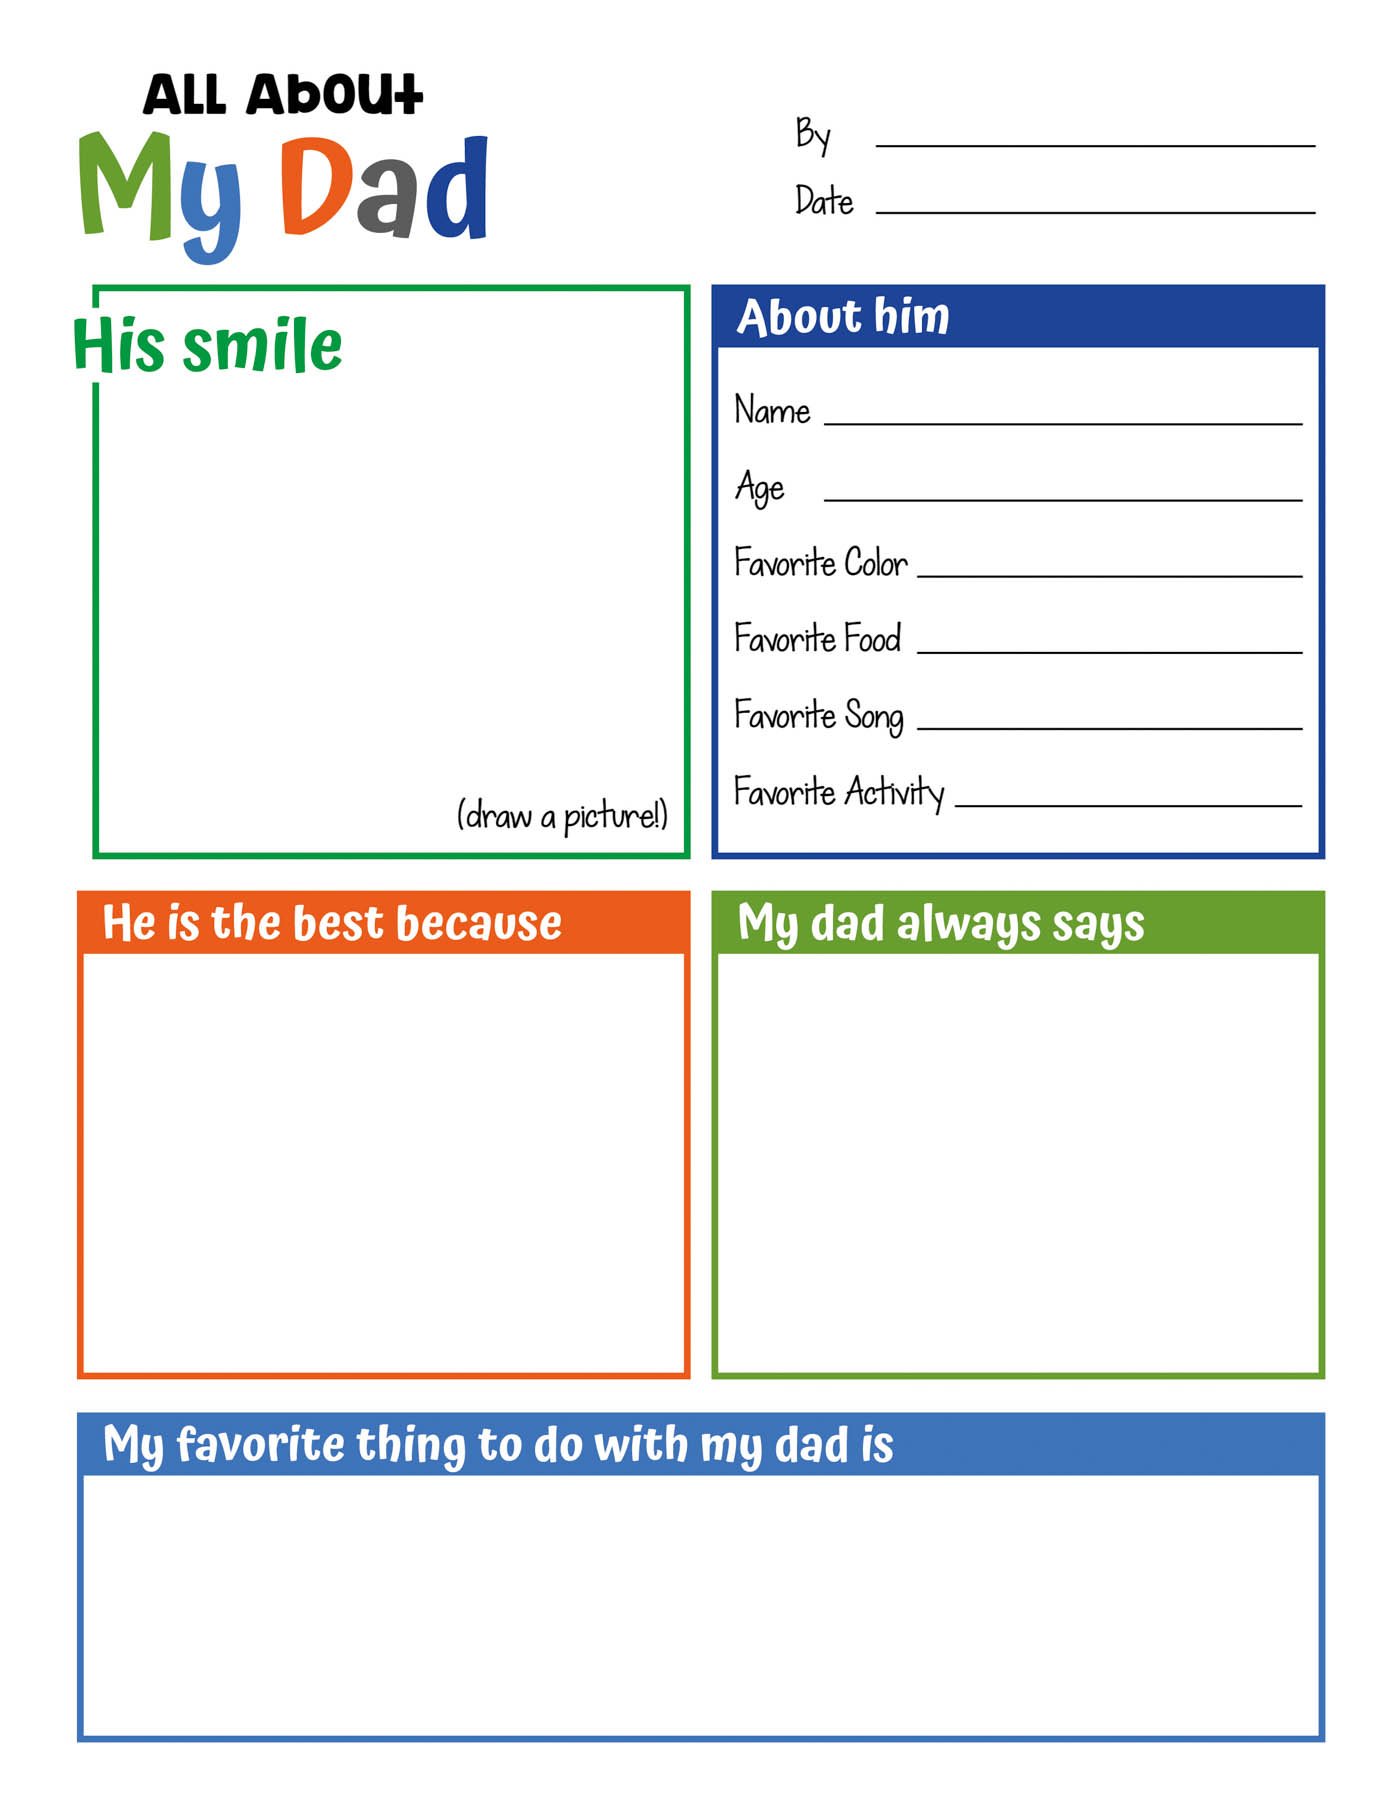 all about dad printable that's blank